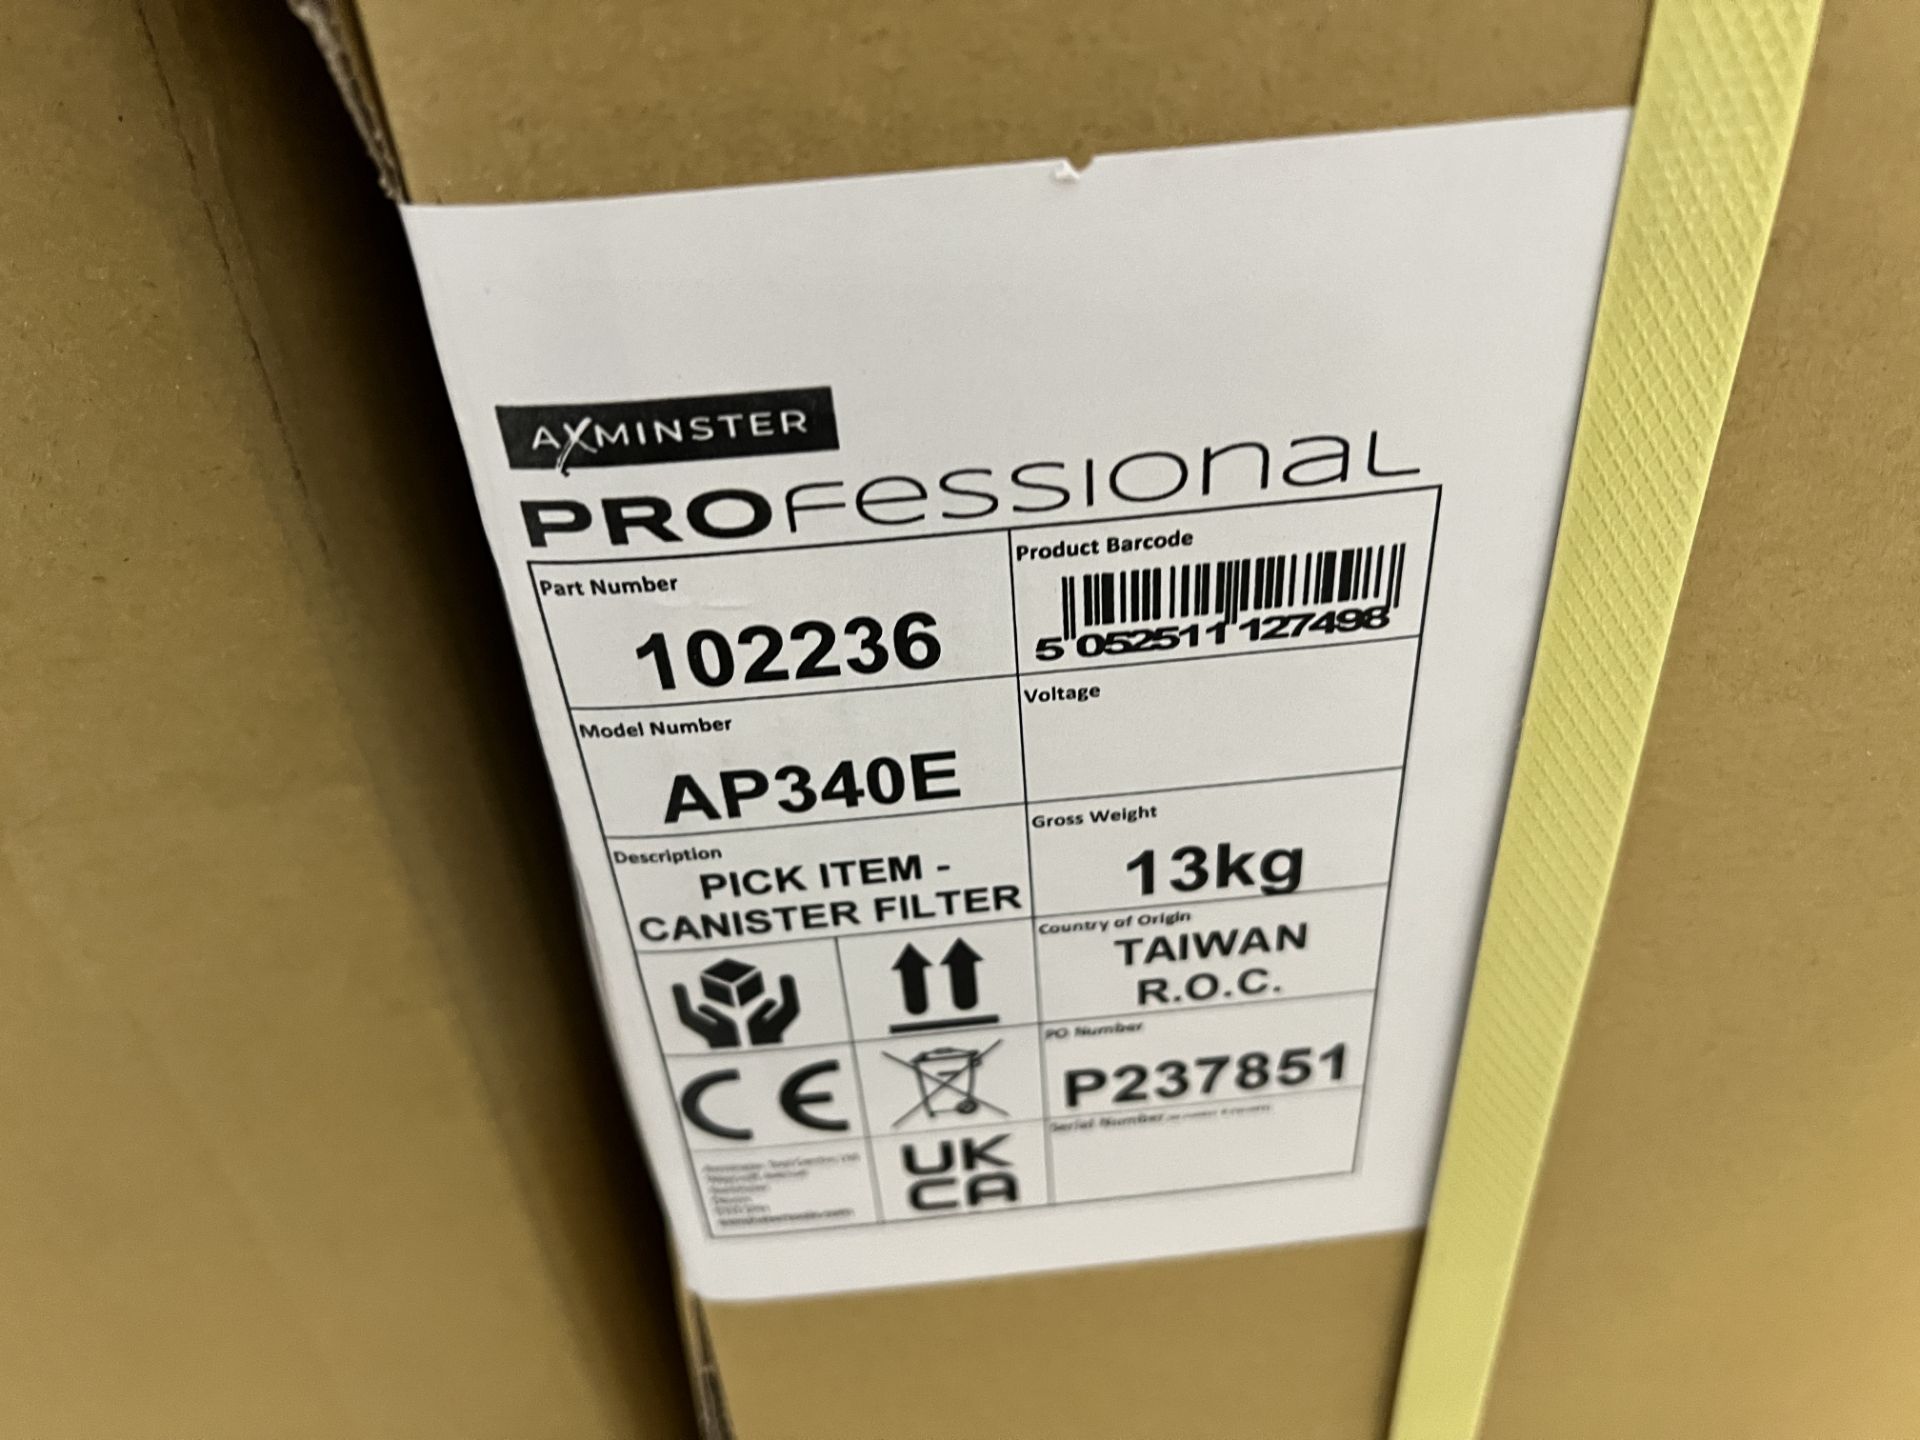 Axminster Professional AP340E extractor unit, S/No. M224991, 230 volts CE marked including 2 x - Image 5 of 7